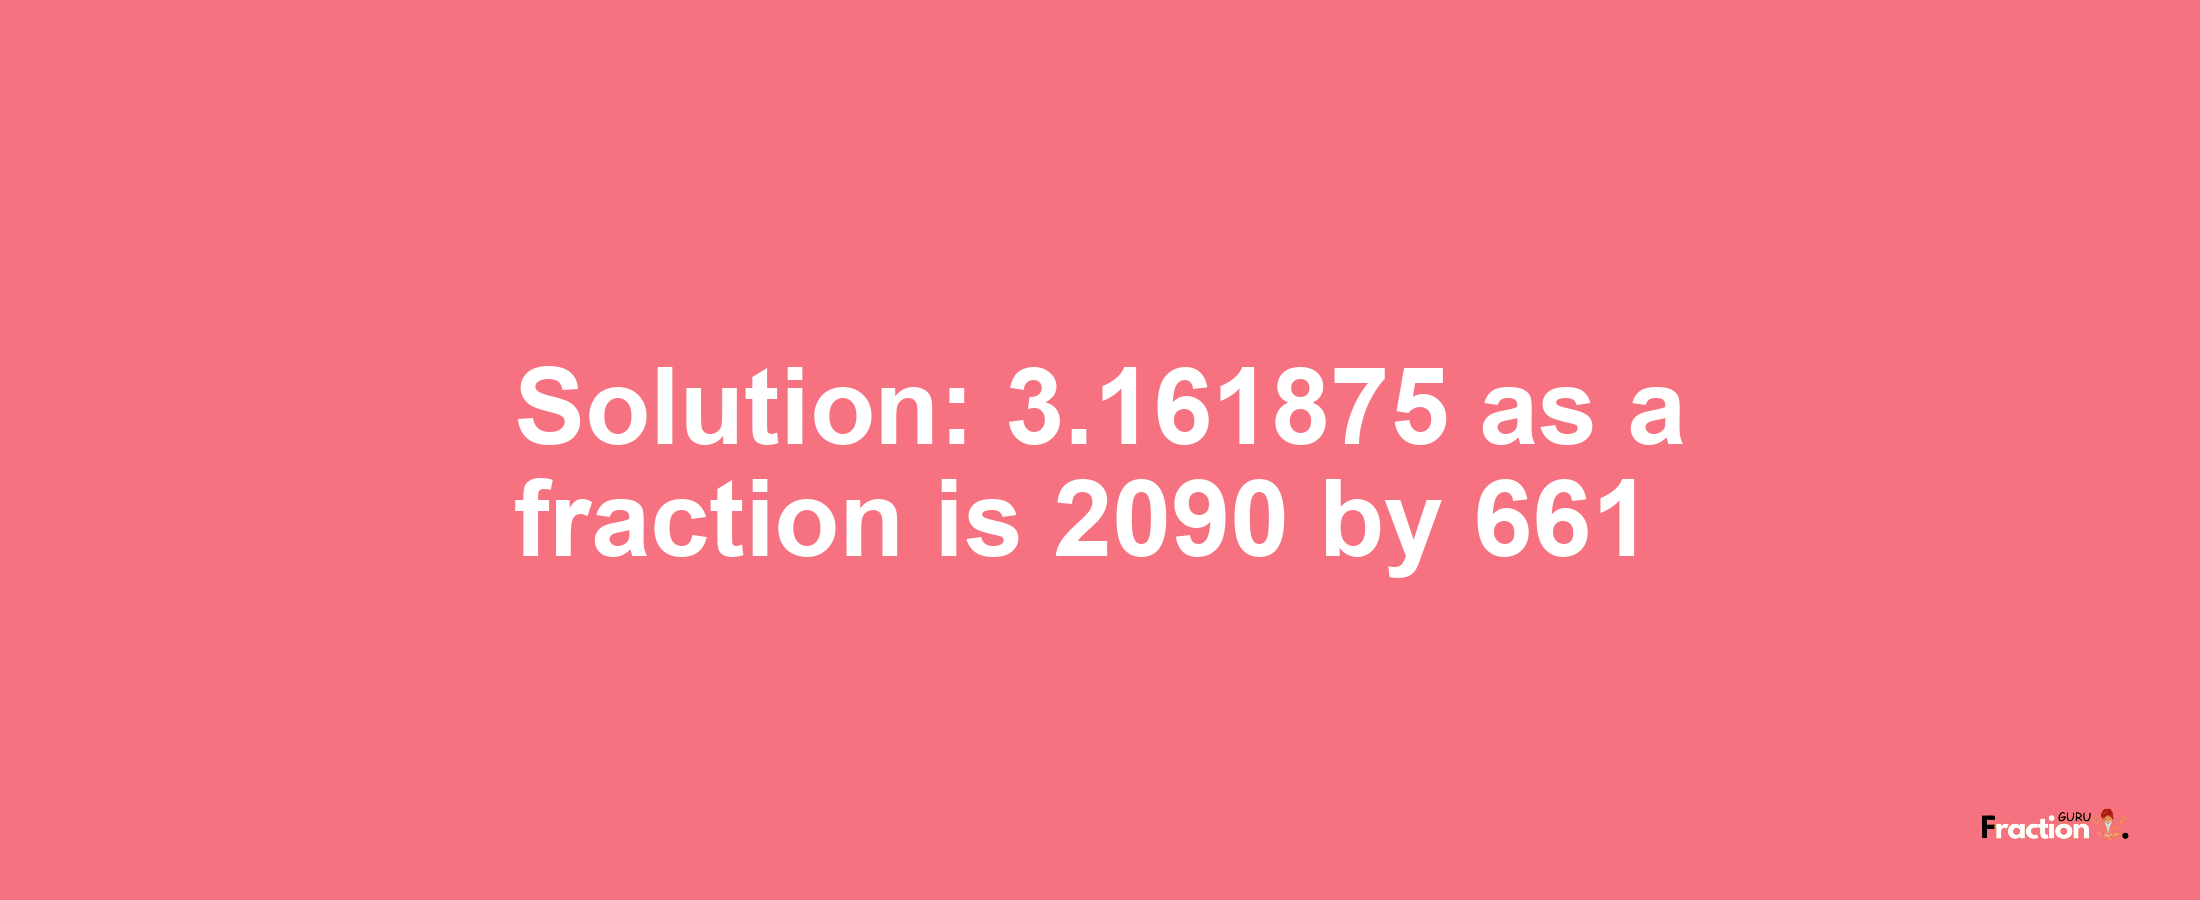 Solution:3.161875 as a fraction is 2090/661